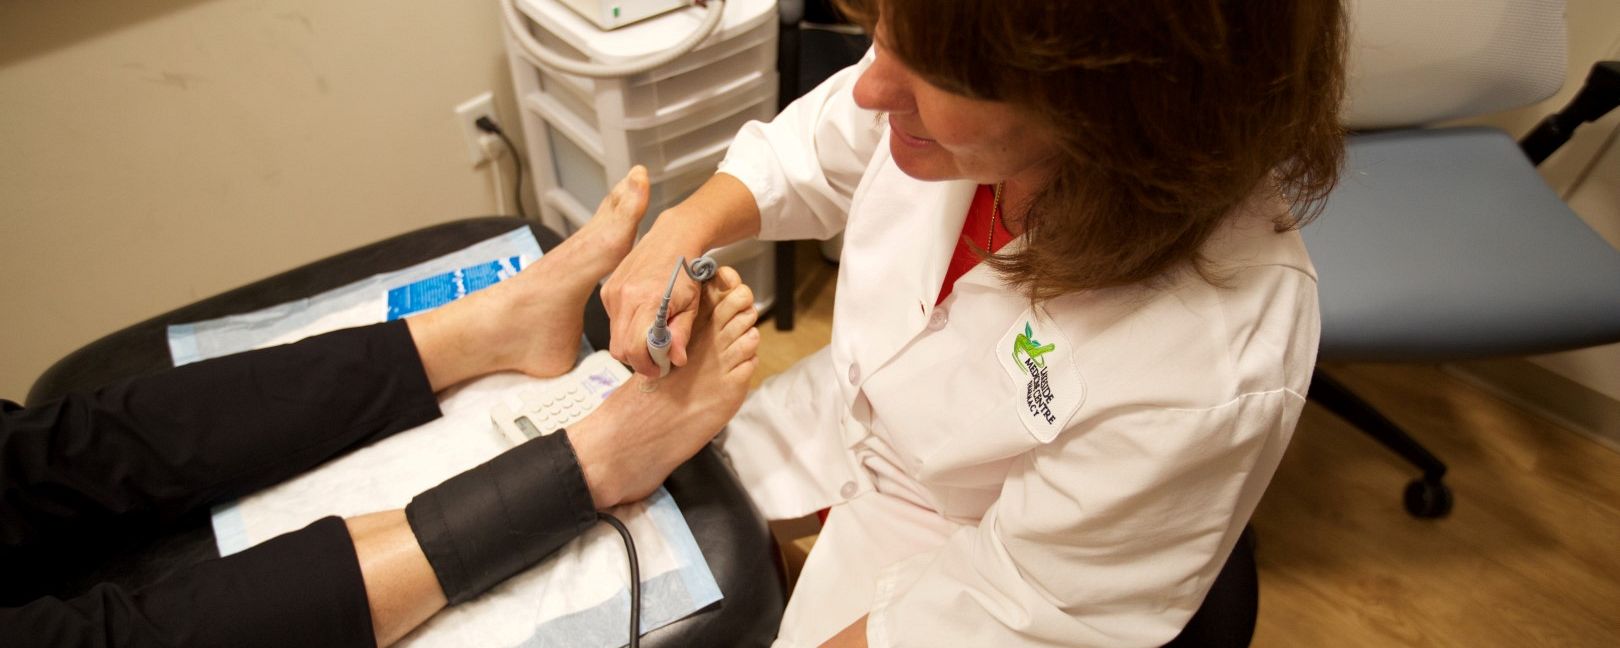 Foot Care image